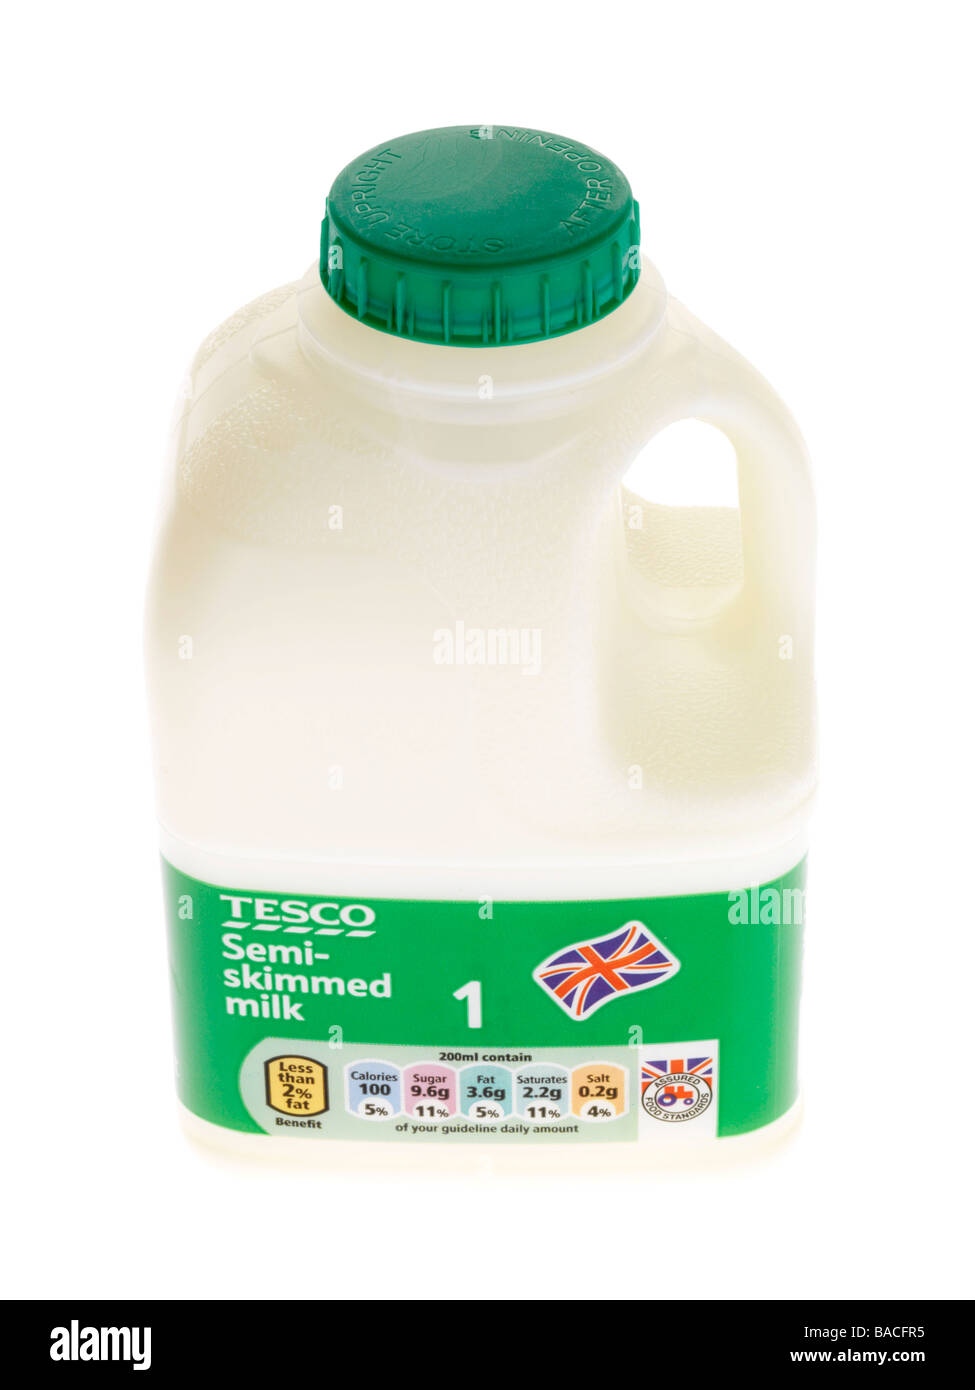 Tesco Branded Plastic Pint Bottle Of Semi Skimmed Milk Isolated Against A White Background With No People And A Clipping Path Stock Photo